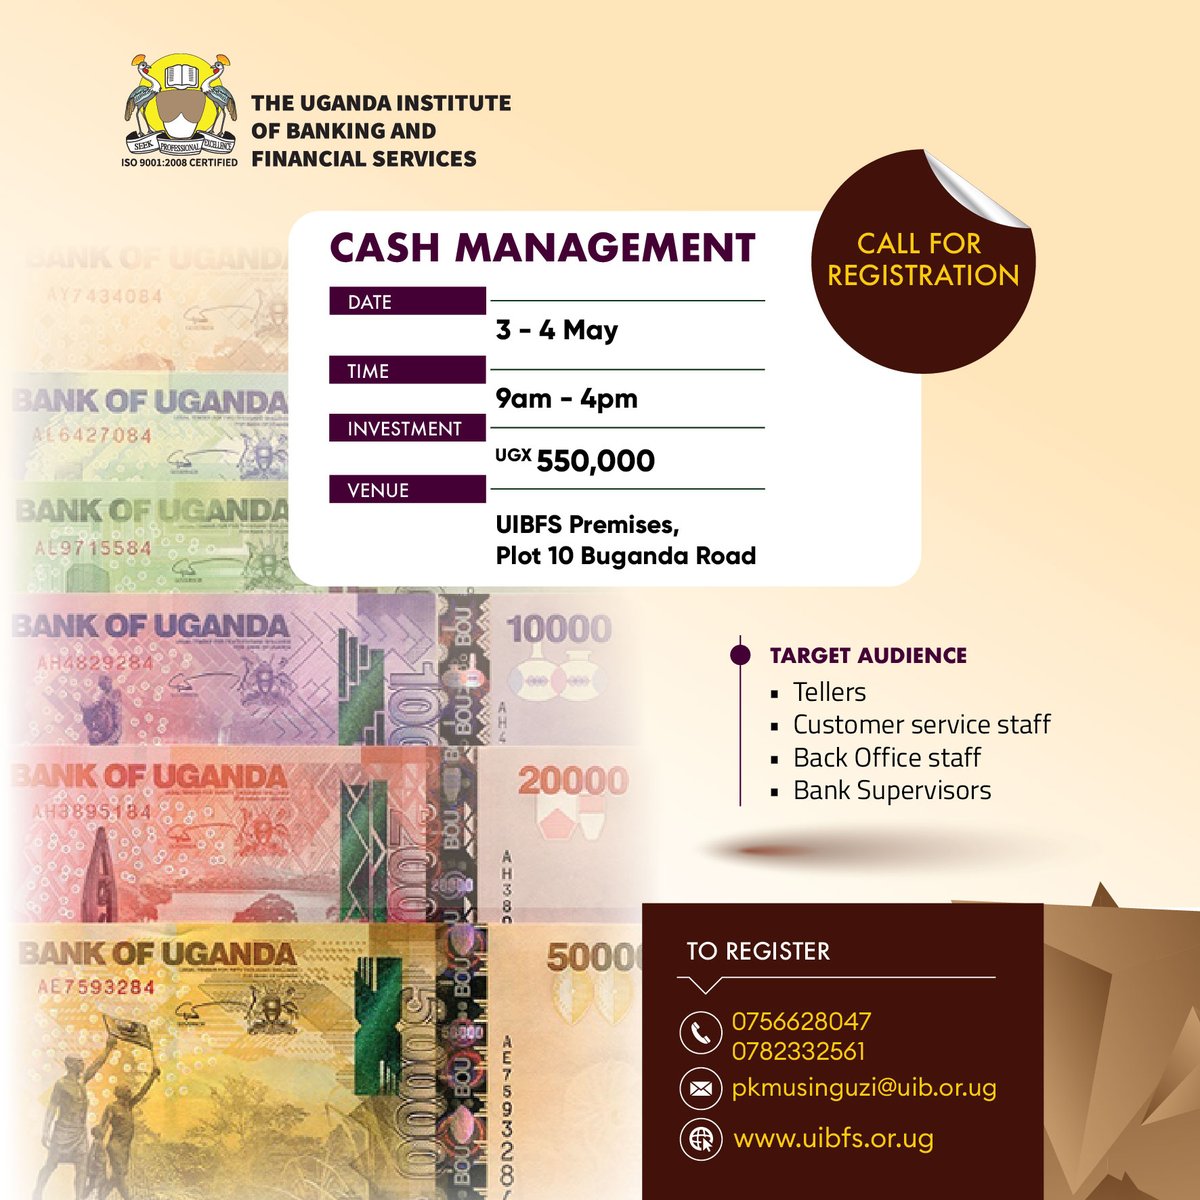 💰 Master the Art of Cash Management! 💸

Join us on May 3–4, from 9:00 AM to 4:00 PM, at UIBFS, Buganda Road.

Empower yourself with essential cash management skills.

Register now! ✉

📞0756628047 / 0782332561 to secure your spot!

#CashManagement #FinancialSkills #UIBFS